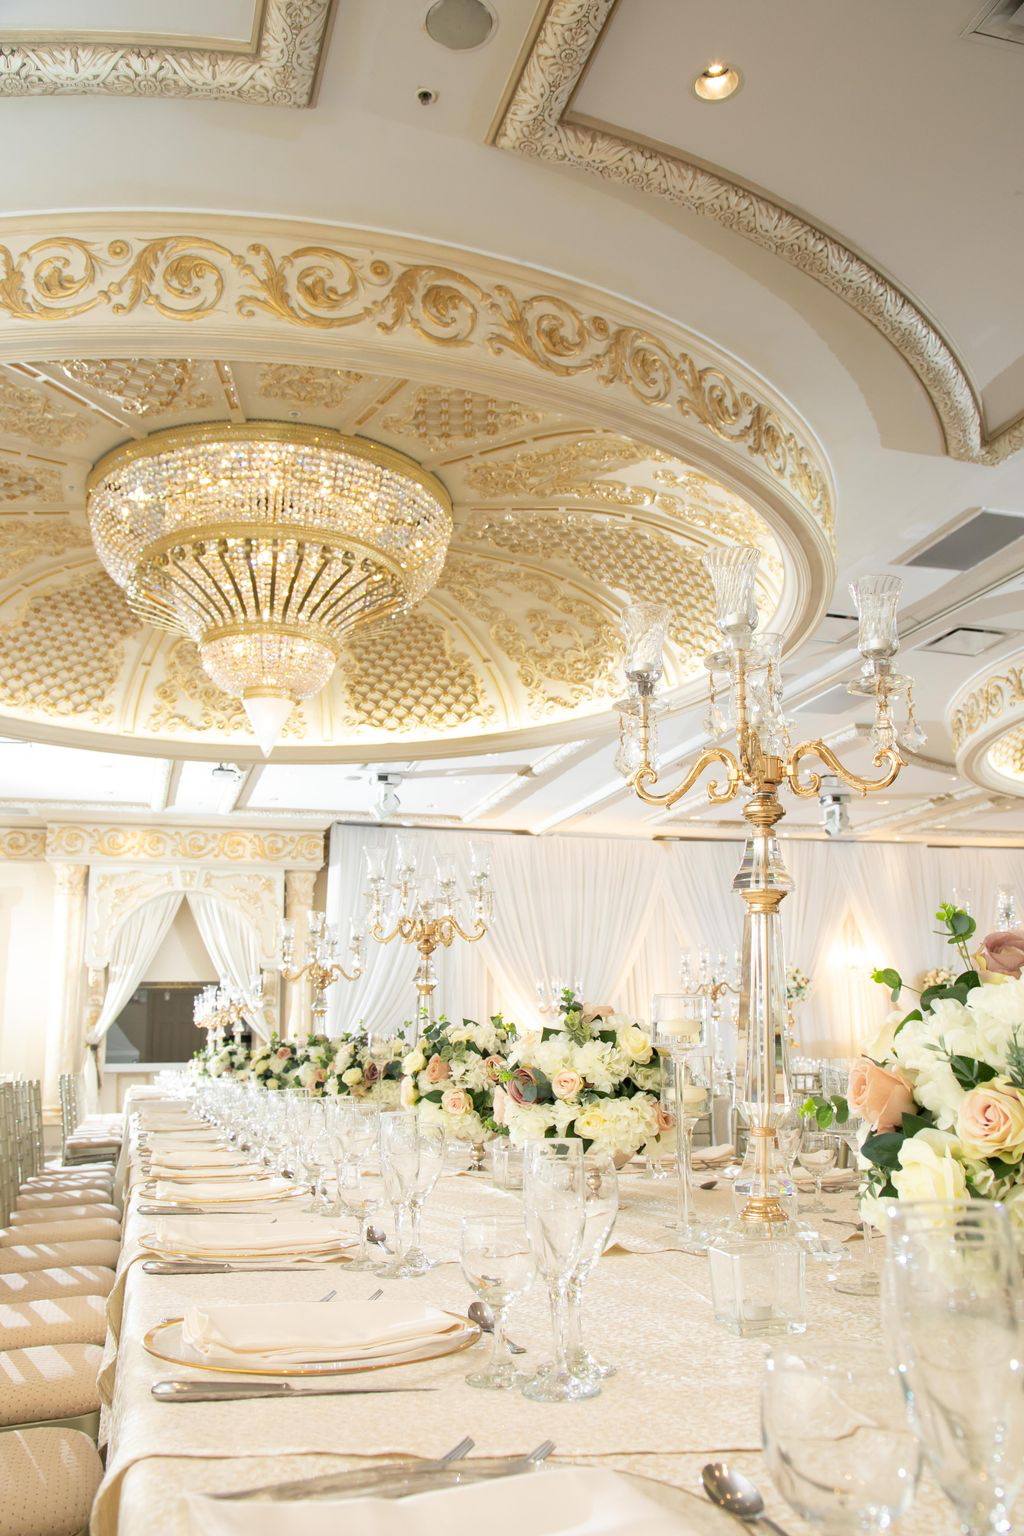 One of Paradise Banquet Halls' many chandeliers overtop a white and light pink themed table set.